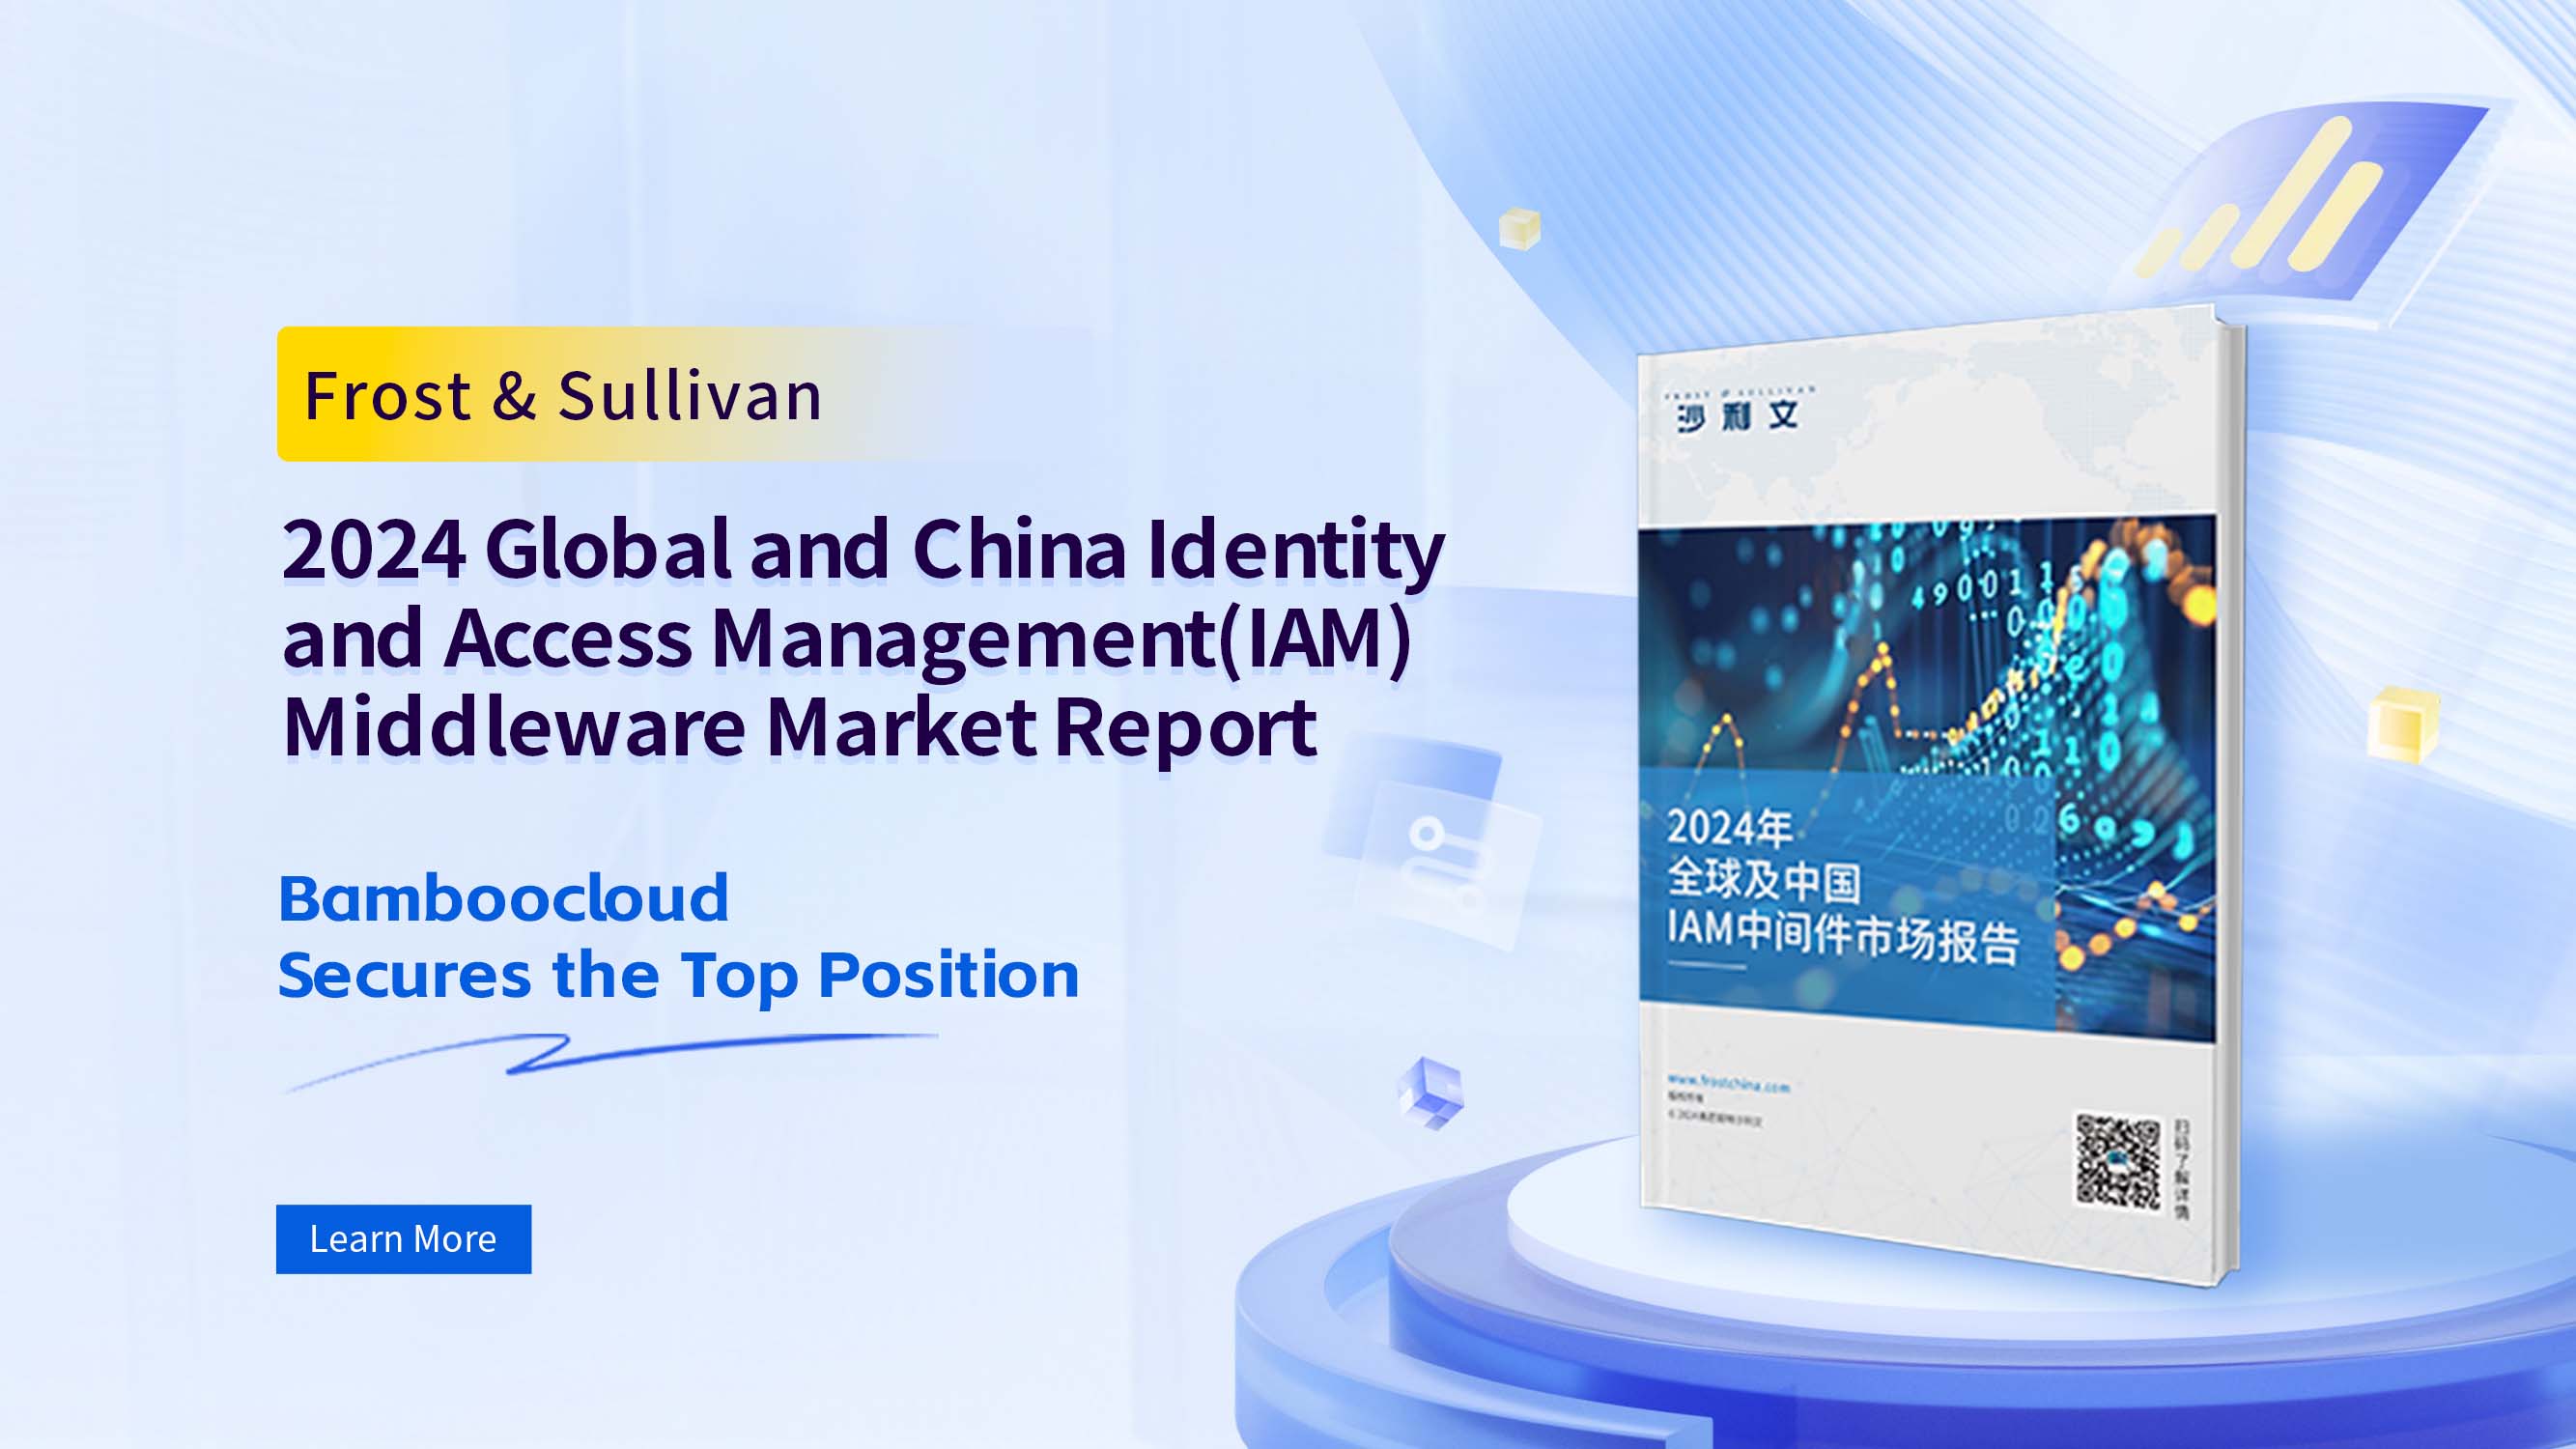 Bamboocloud Tops the List | Sullivan's "2024 Global and China IAM Middleware Market Report" Officially Released